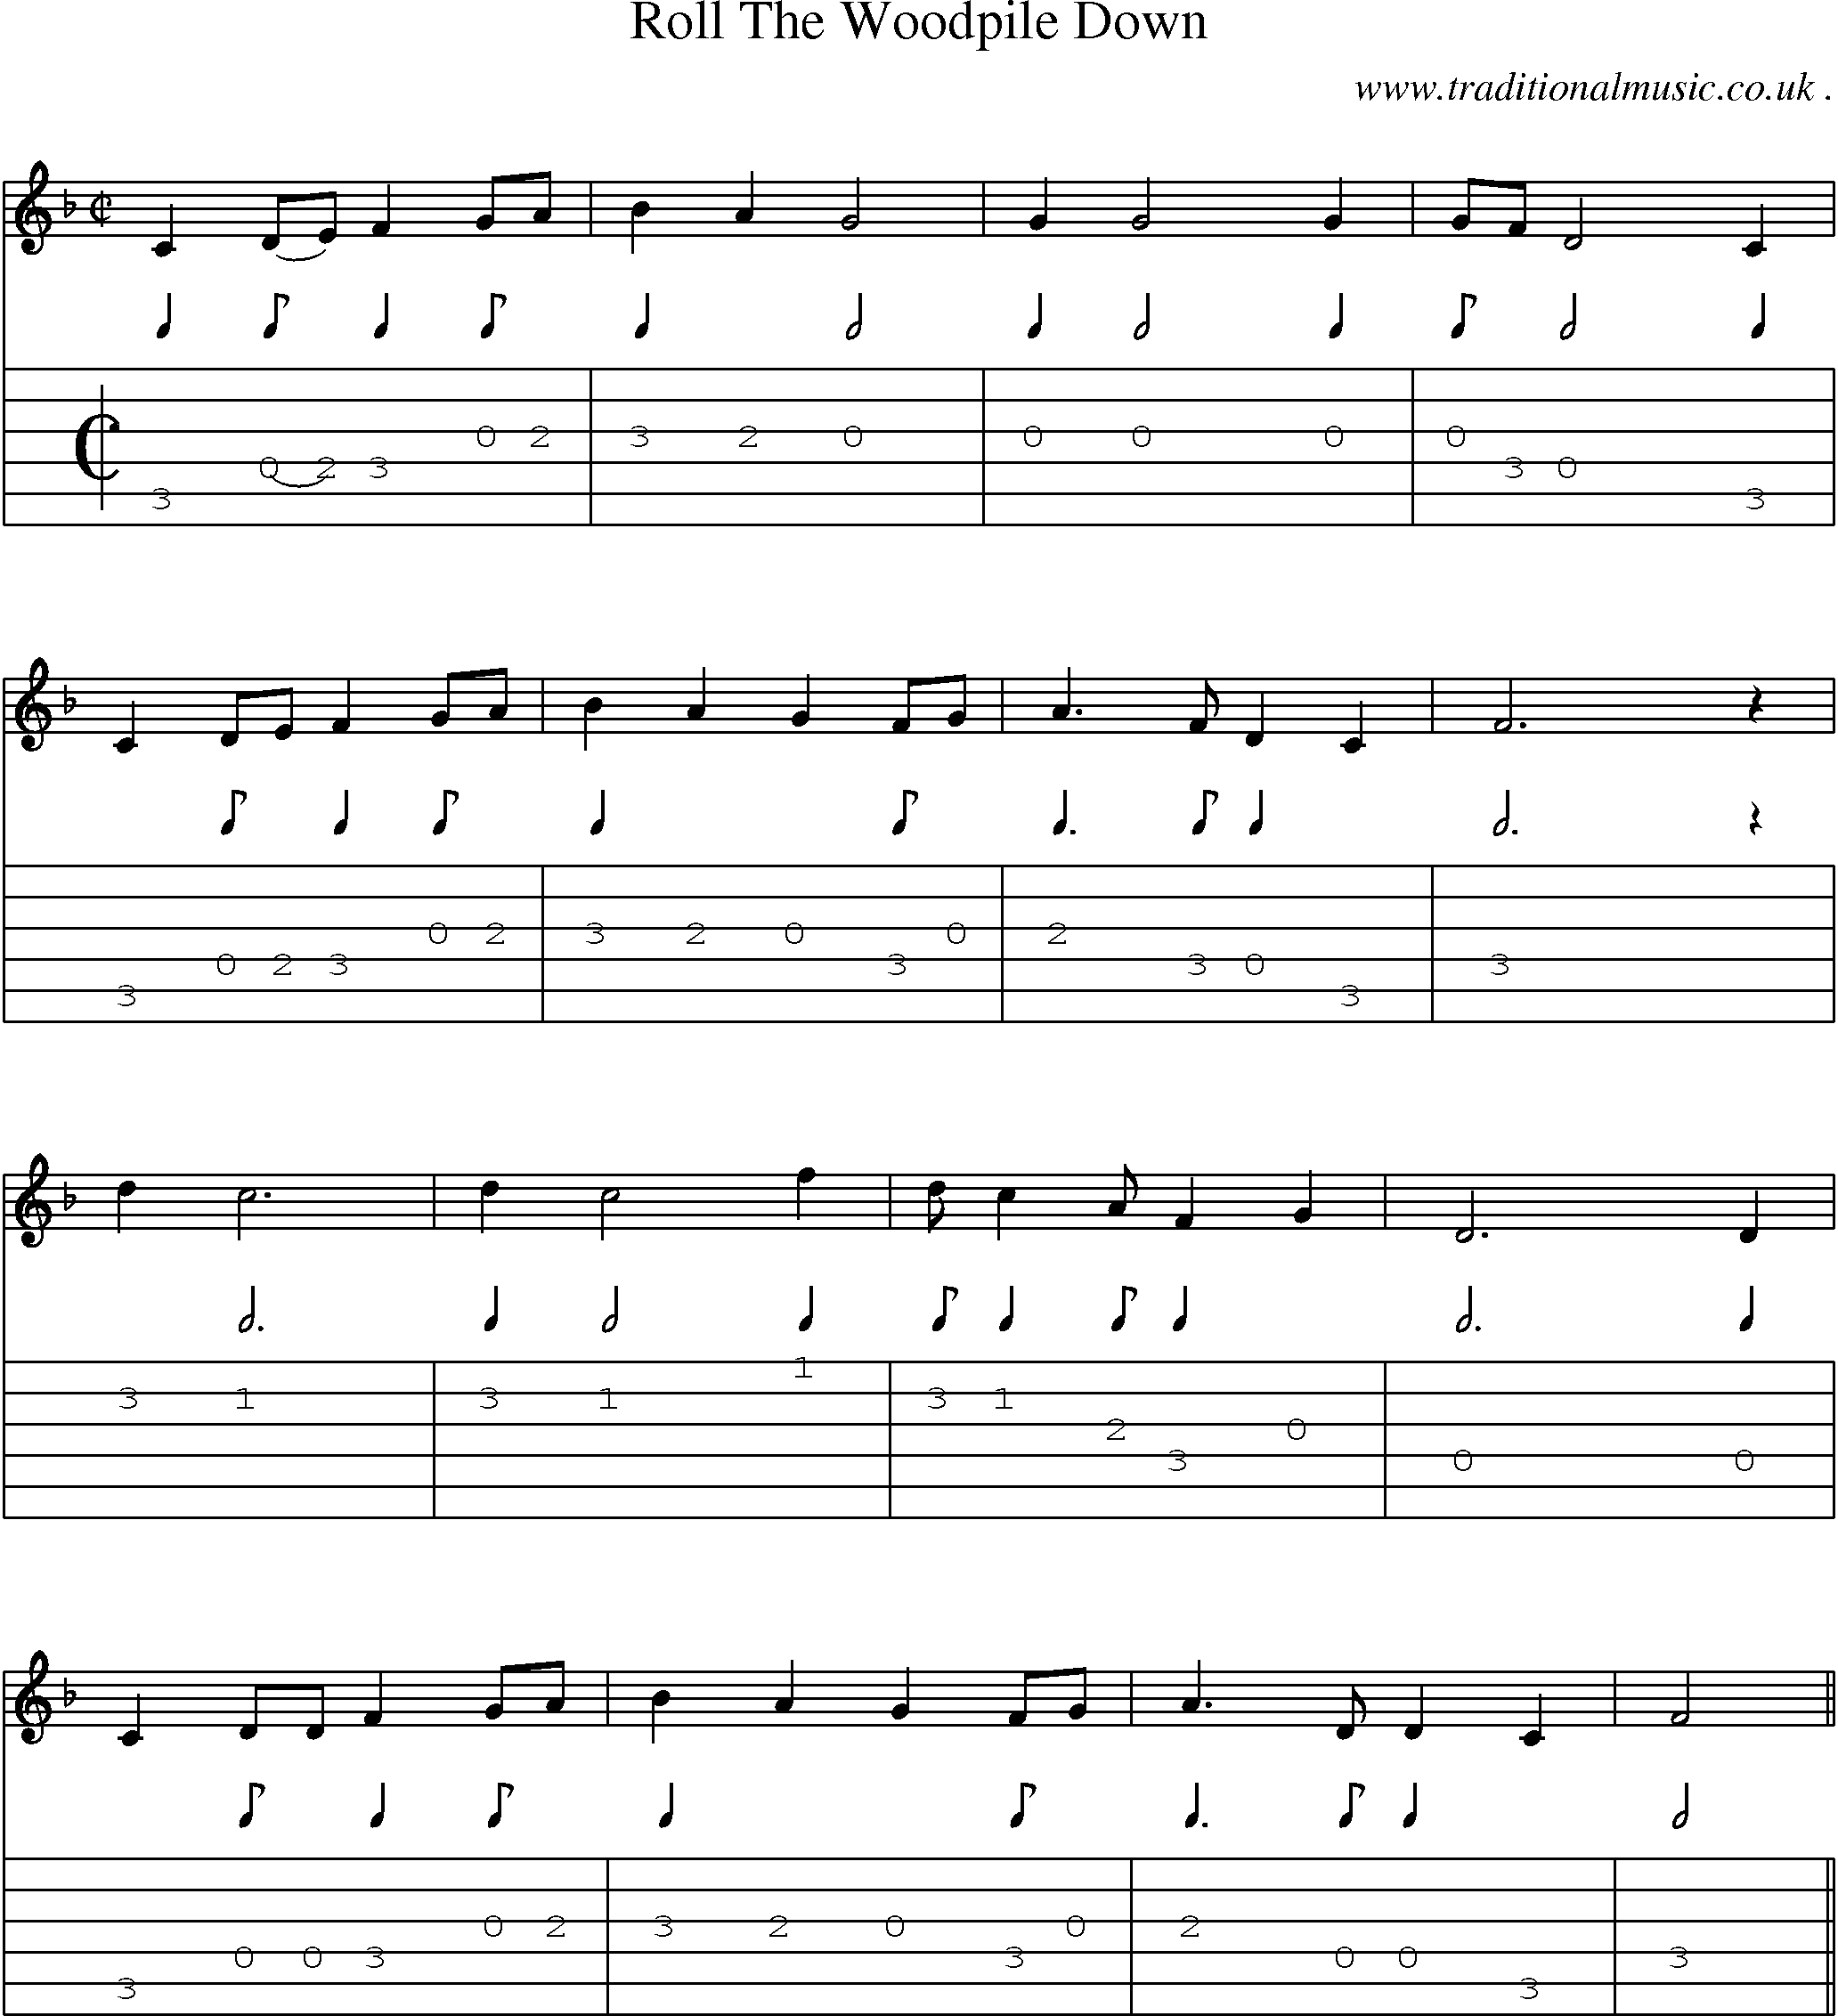 Sheet-Music and Guitar Tabs for Roll The Woodpile Down